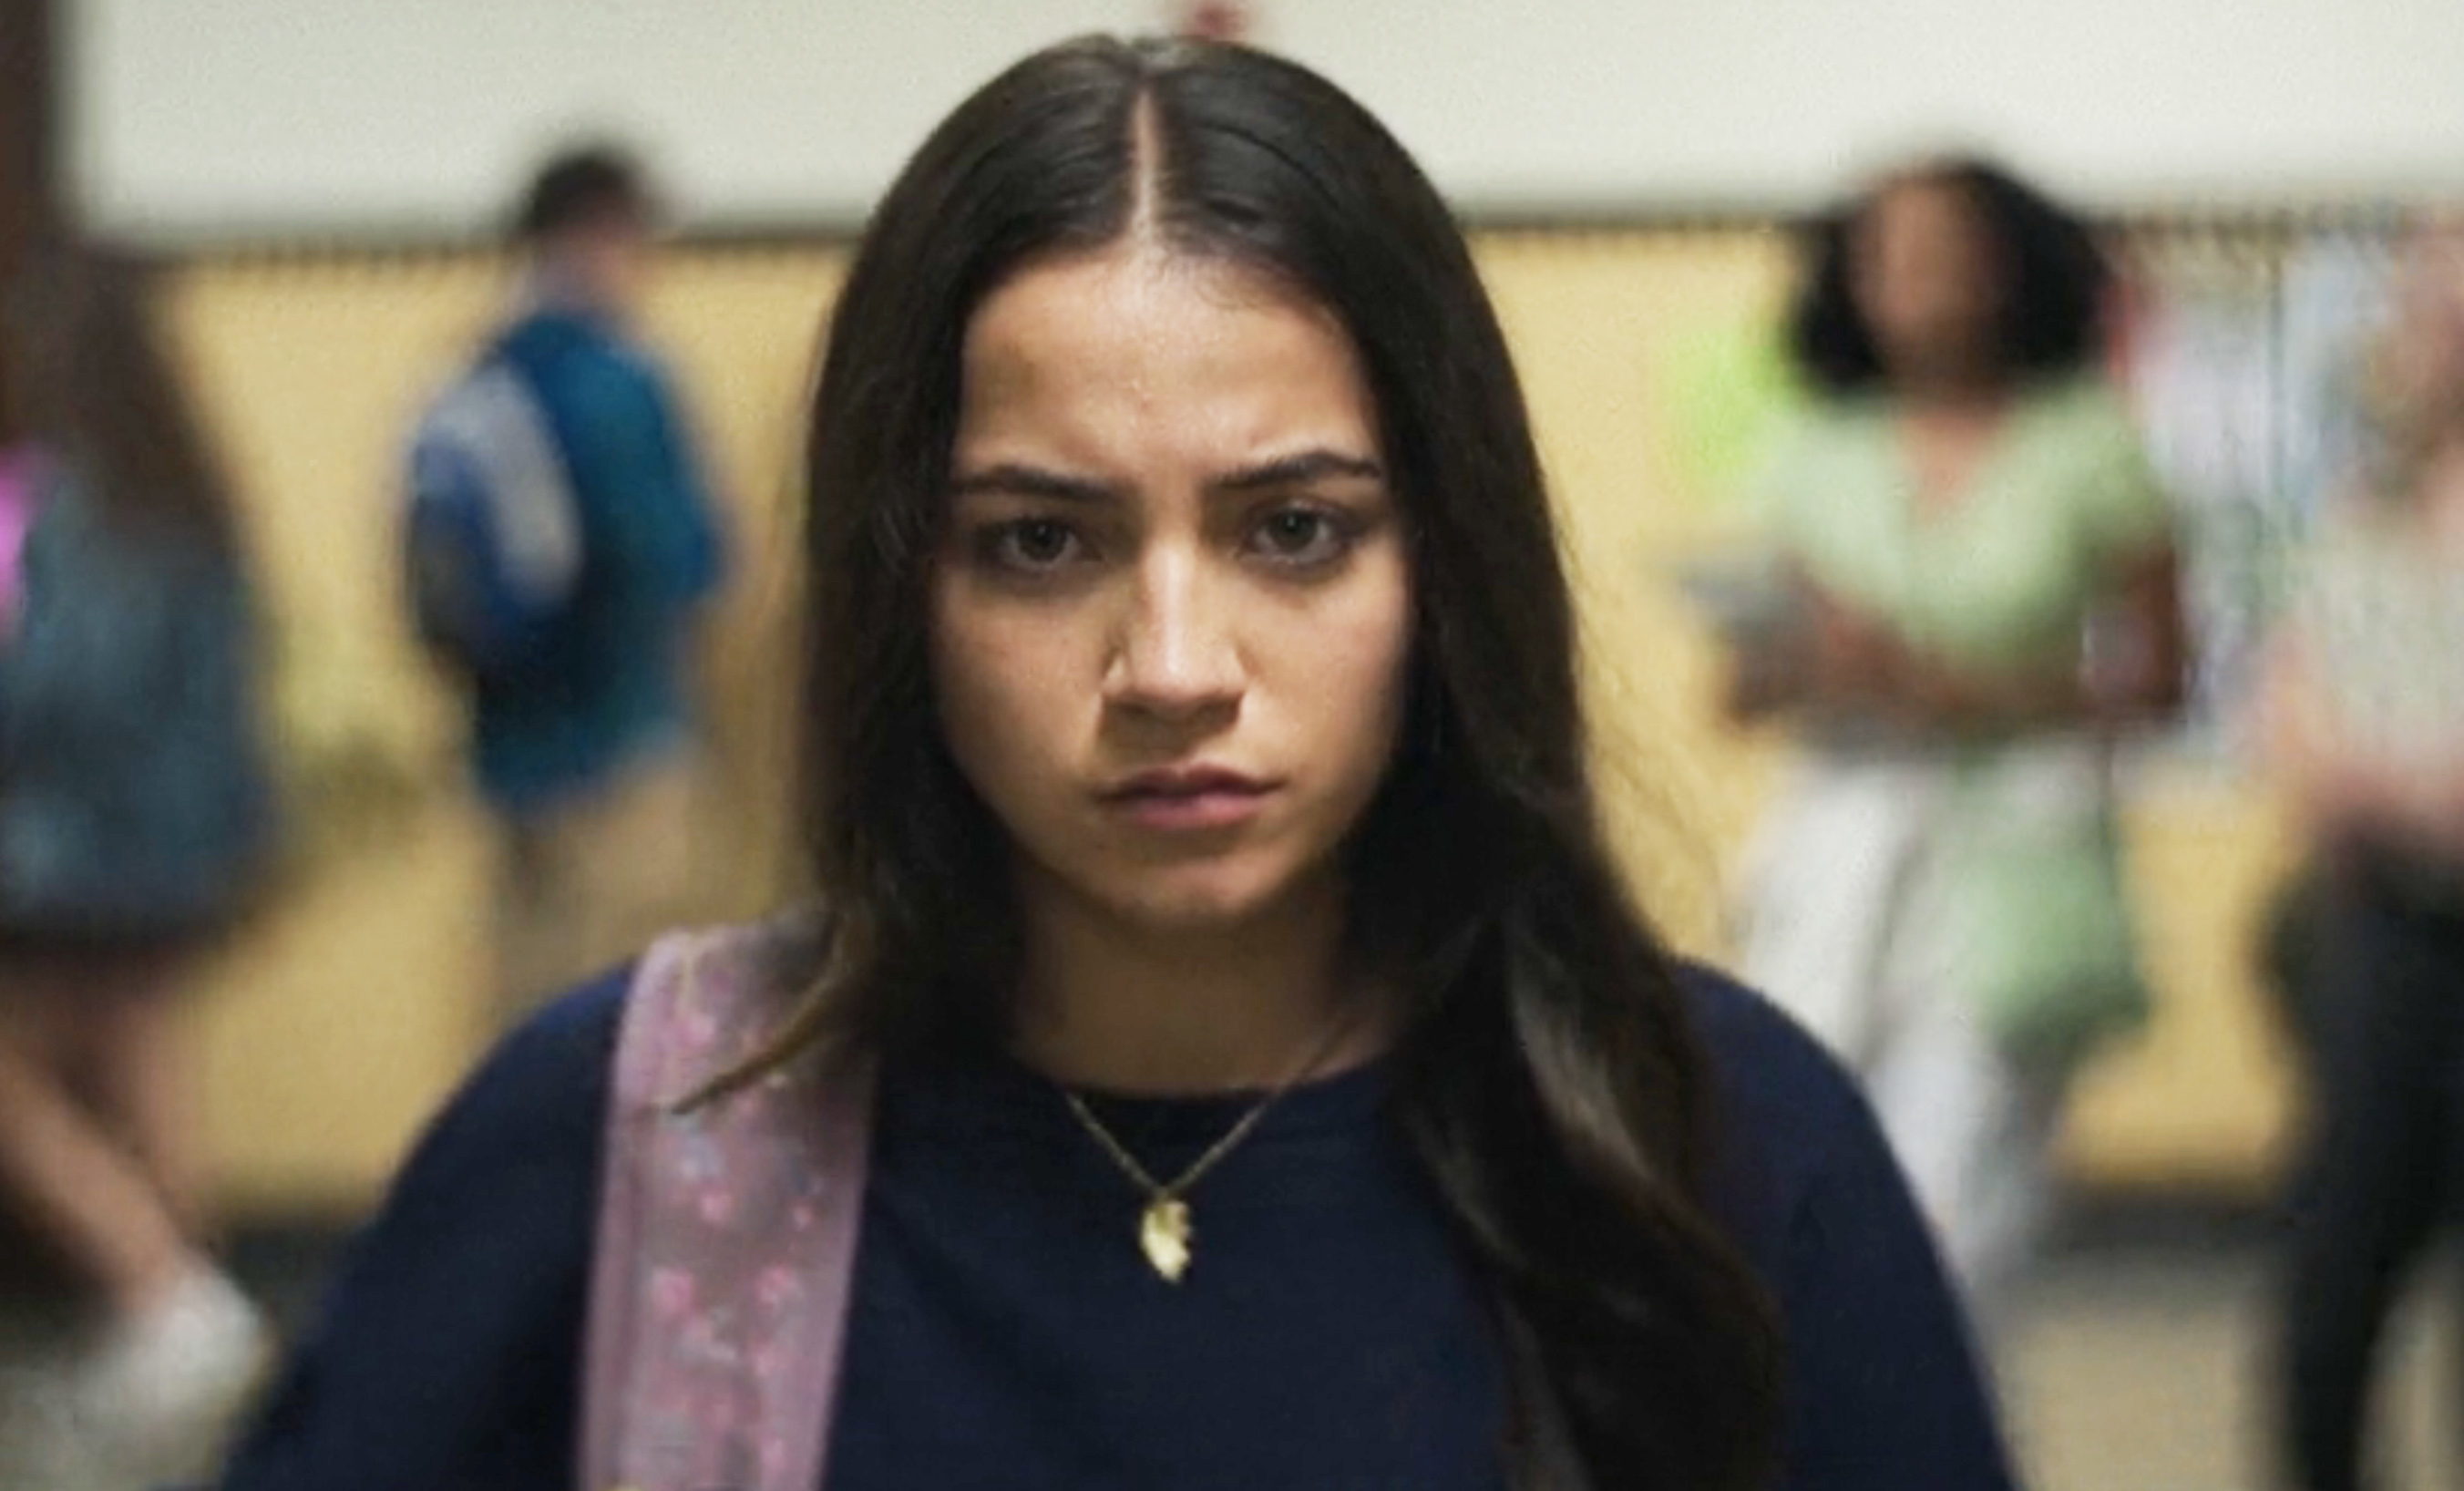 Close-up of Euphoria character Rue Bennett looking concerned in a school hallway